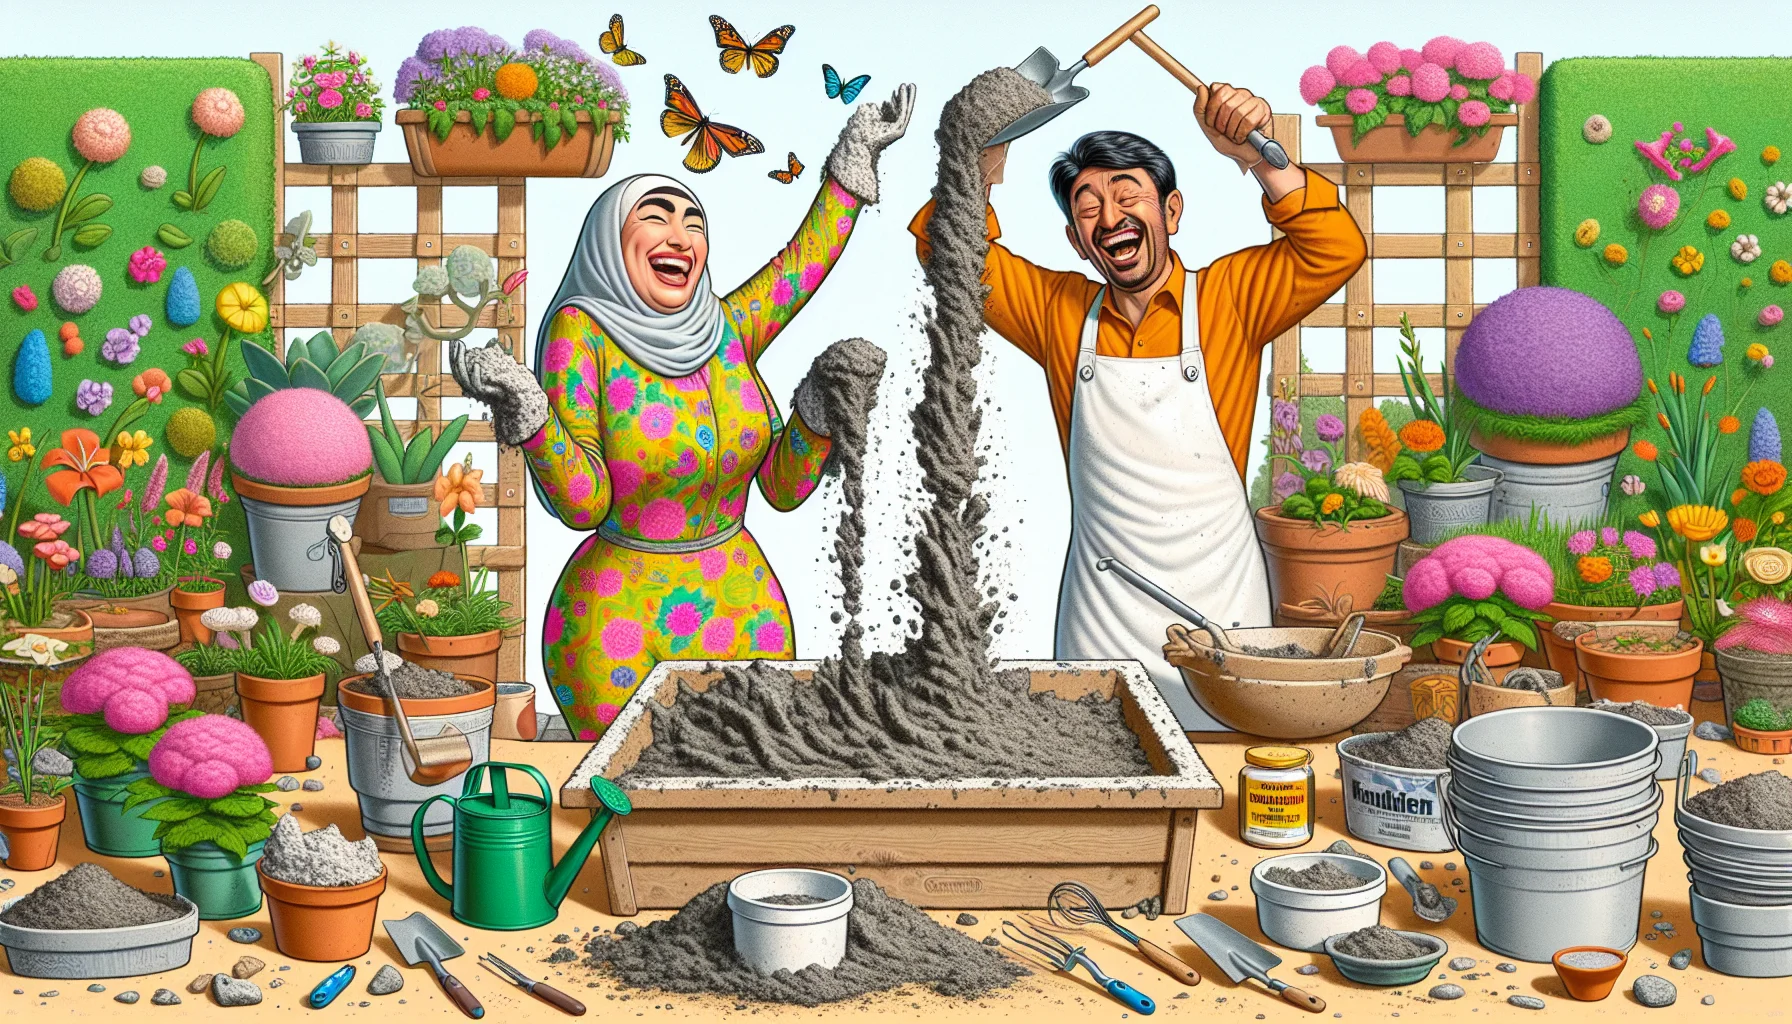 Visualize a hilarious yet engaging scene centred around making Hypertufa troughs. Picture a cheerful Middle-Eastern woman and a jovial South Asian man, each suited up in vibrant gardening attire, enthusiastically immersed in the process. The mix of peat moss, perlite, and Portland cement spills comedically, creating comical shapes and forms instead of the desired troughs. Pots and gardening tools are scattered around in a chaotic yet charming arrangement. Butterflies flit around, flowers bloom in the background, and birds are singing on the branches, emphasizing the joy of gardening.